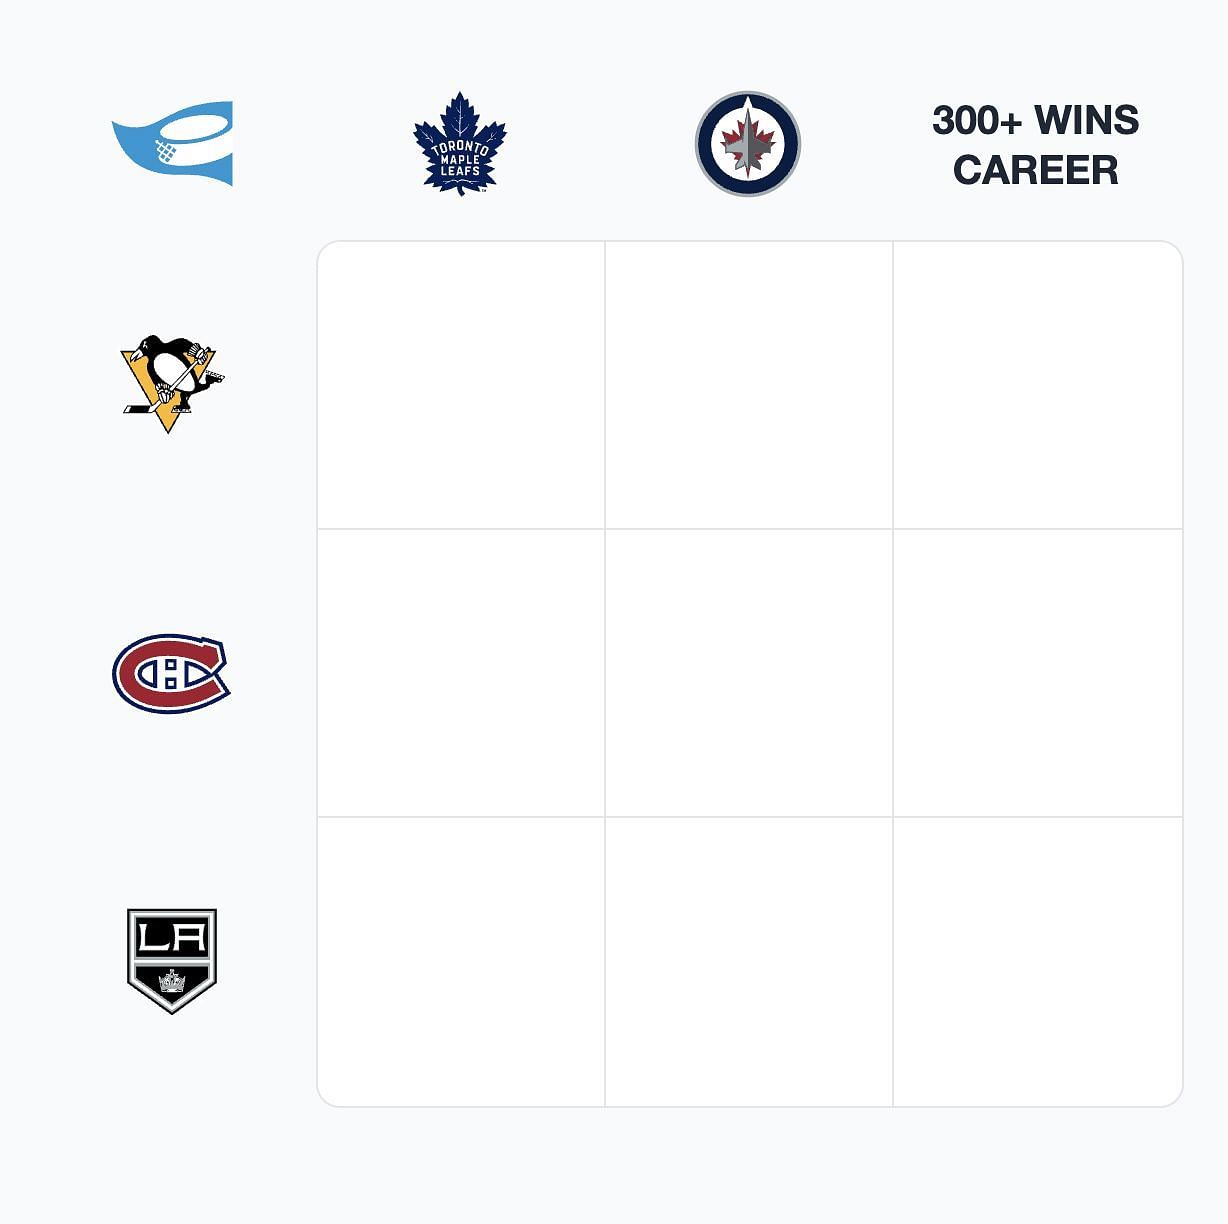 NHL Immaculate Grid answers for September 4